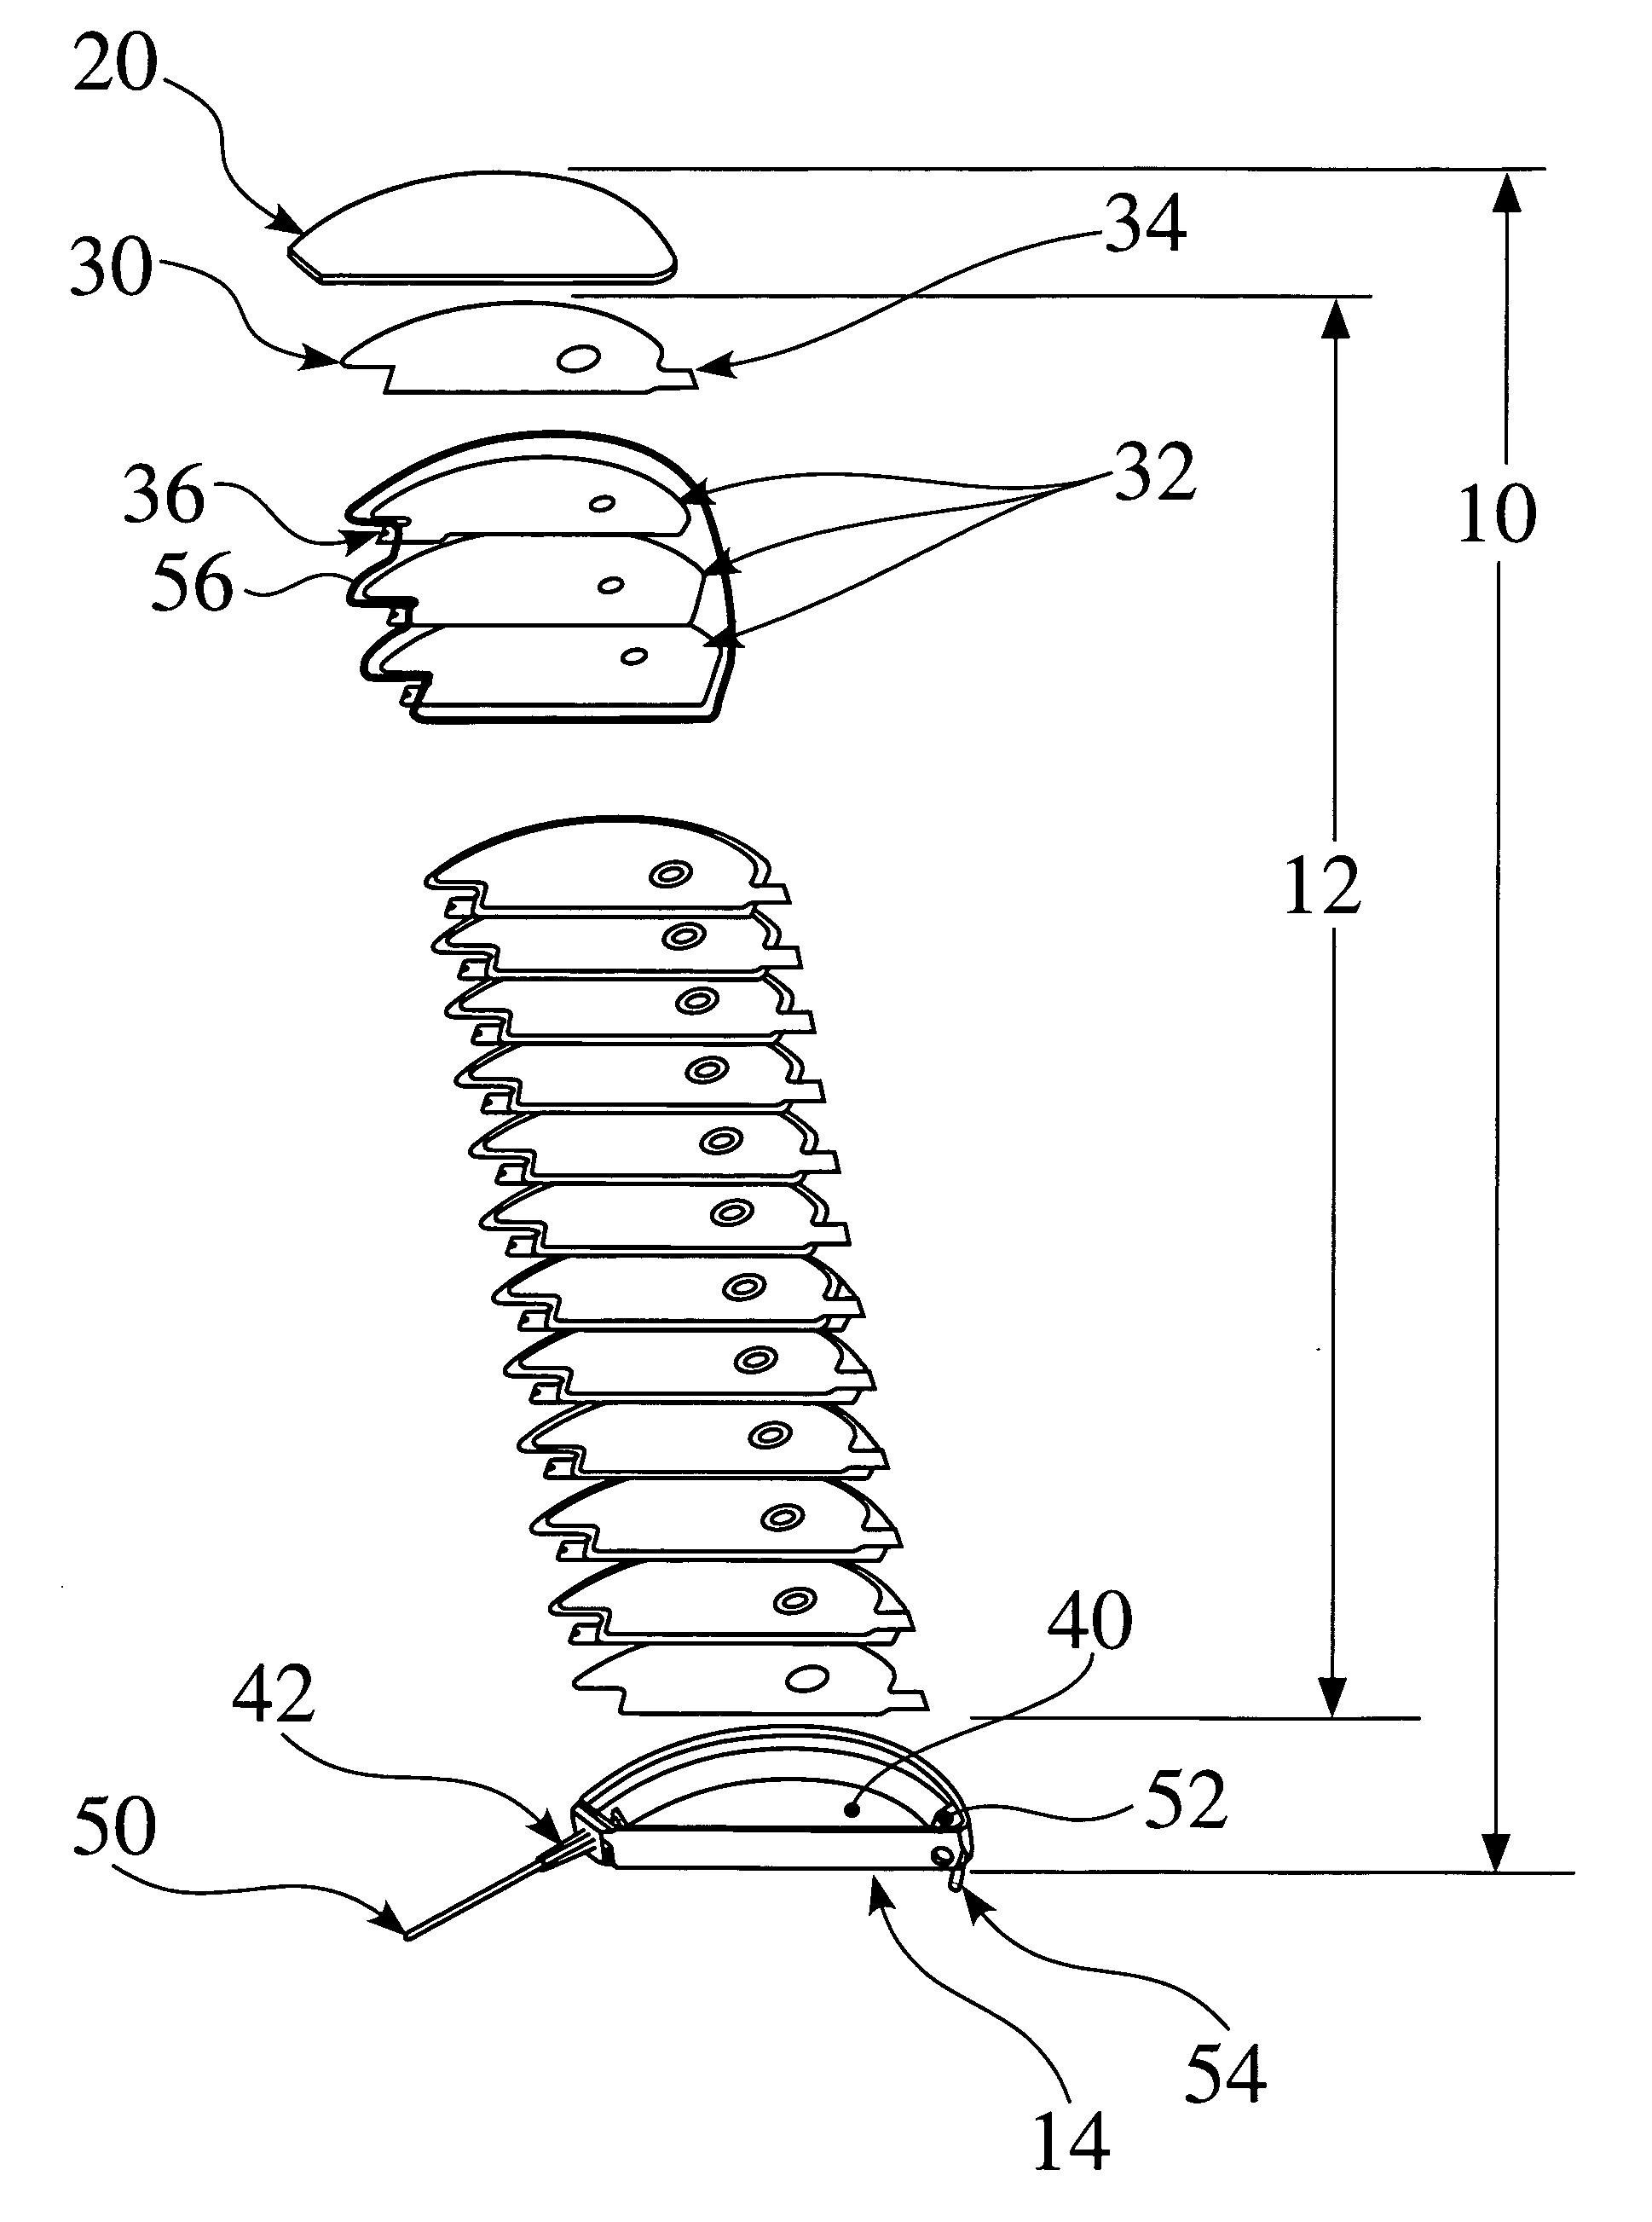 Capacitor anode assembly